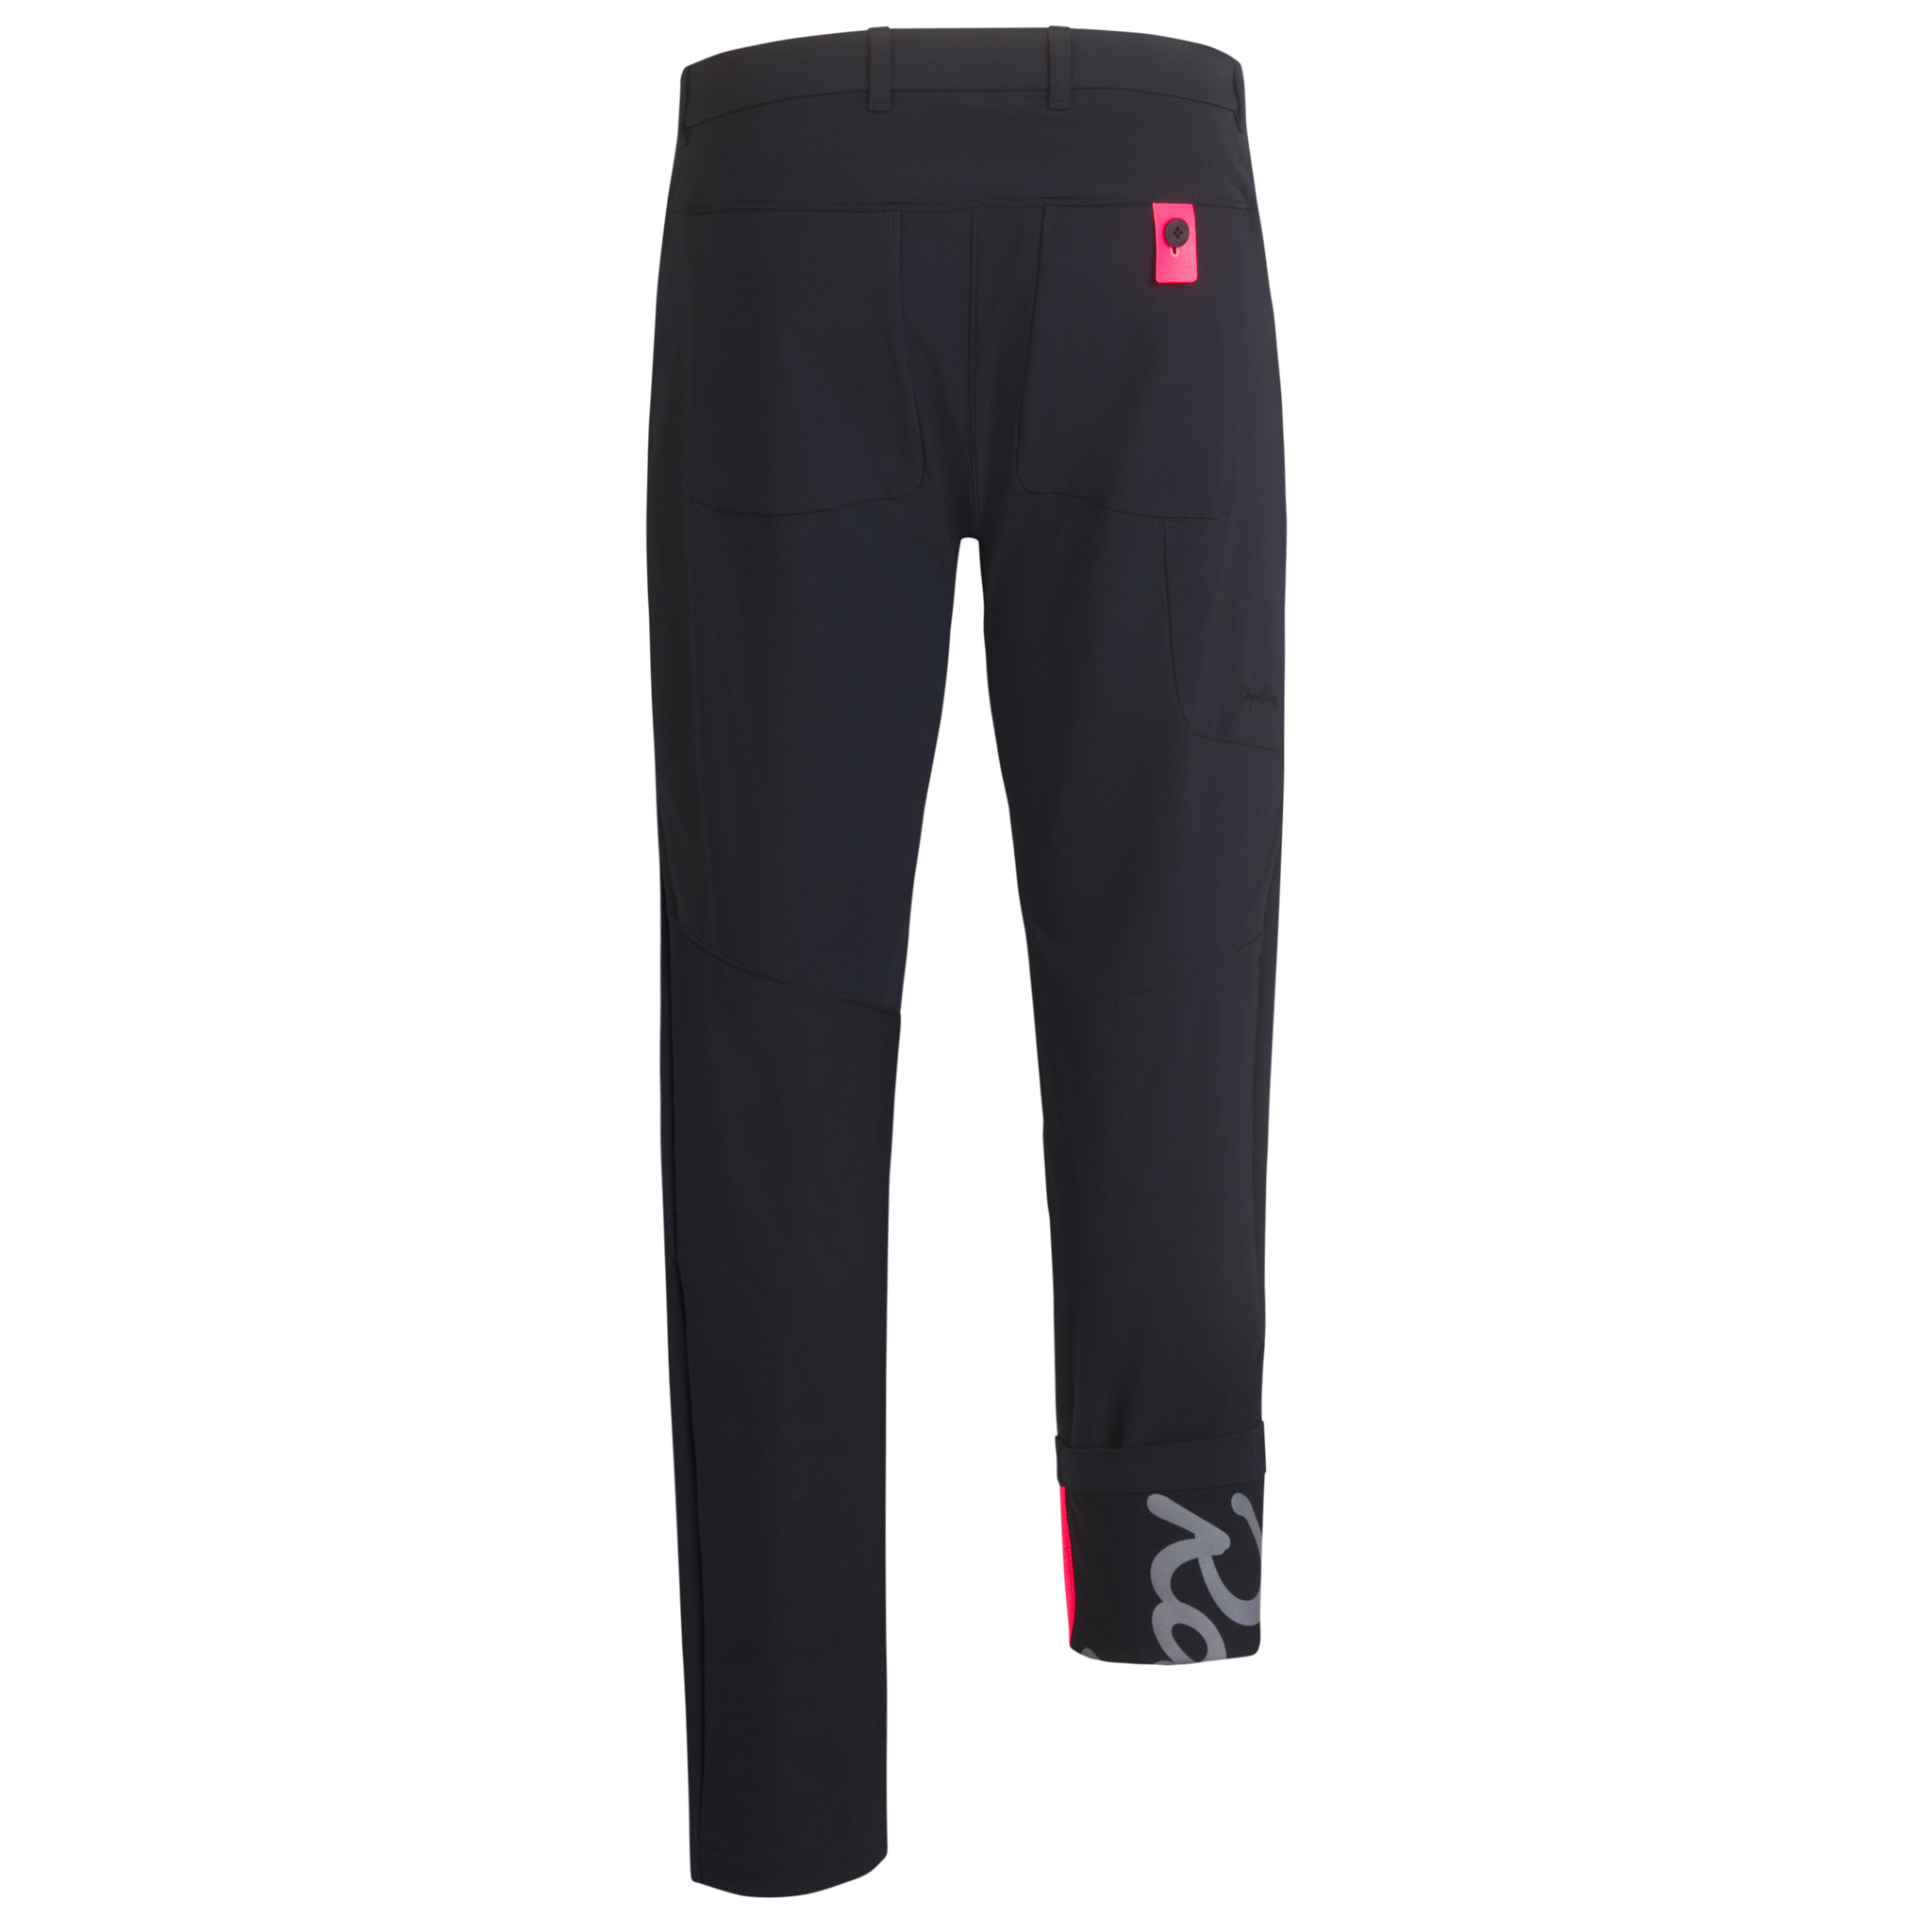 Rapha Technical Cycling Trousers, Black, S